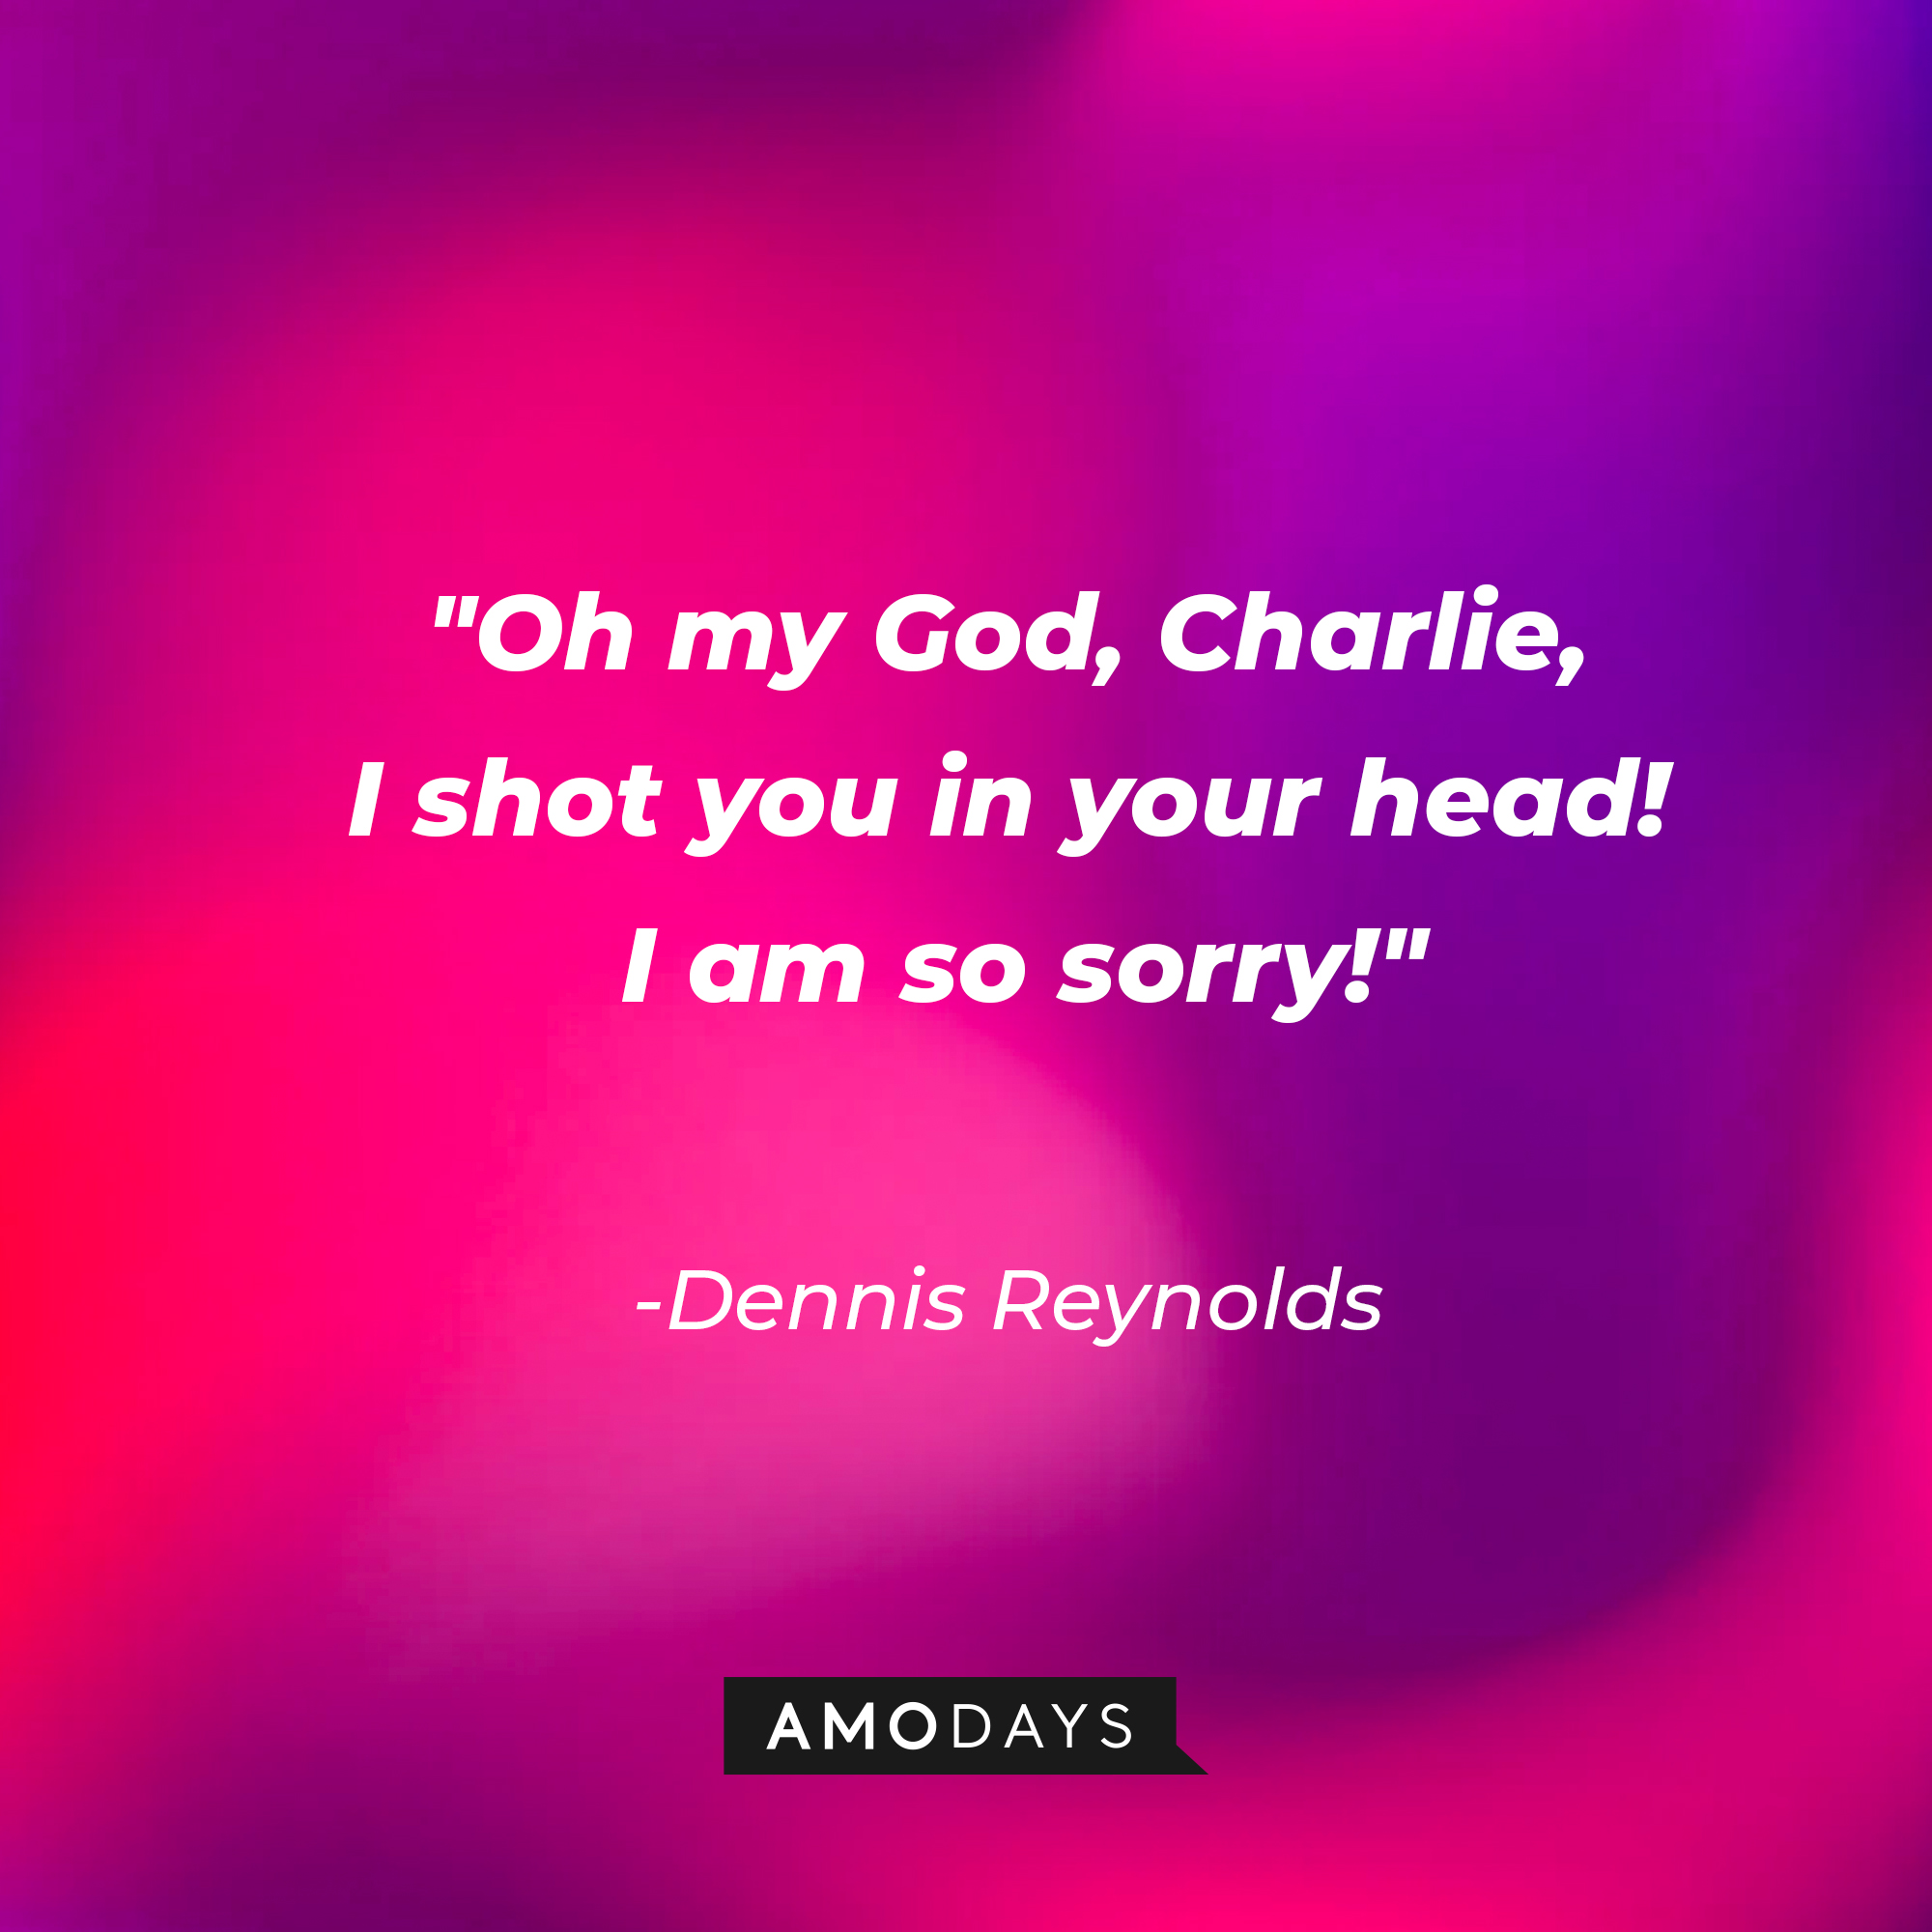 Dennis Reynolds’ quote:  “Oh my God, Charlie, I shot you in your head! I am so sorry!” | Source: AmoDays